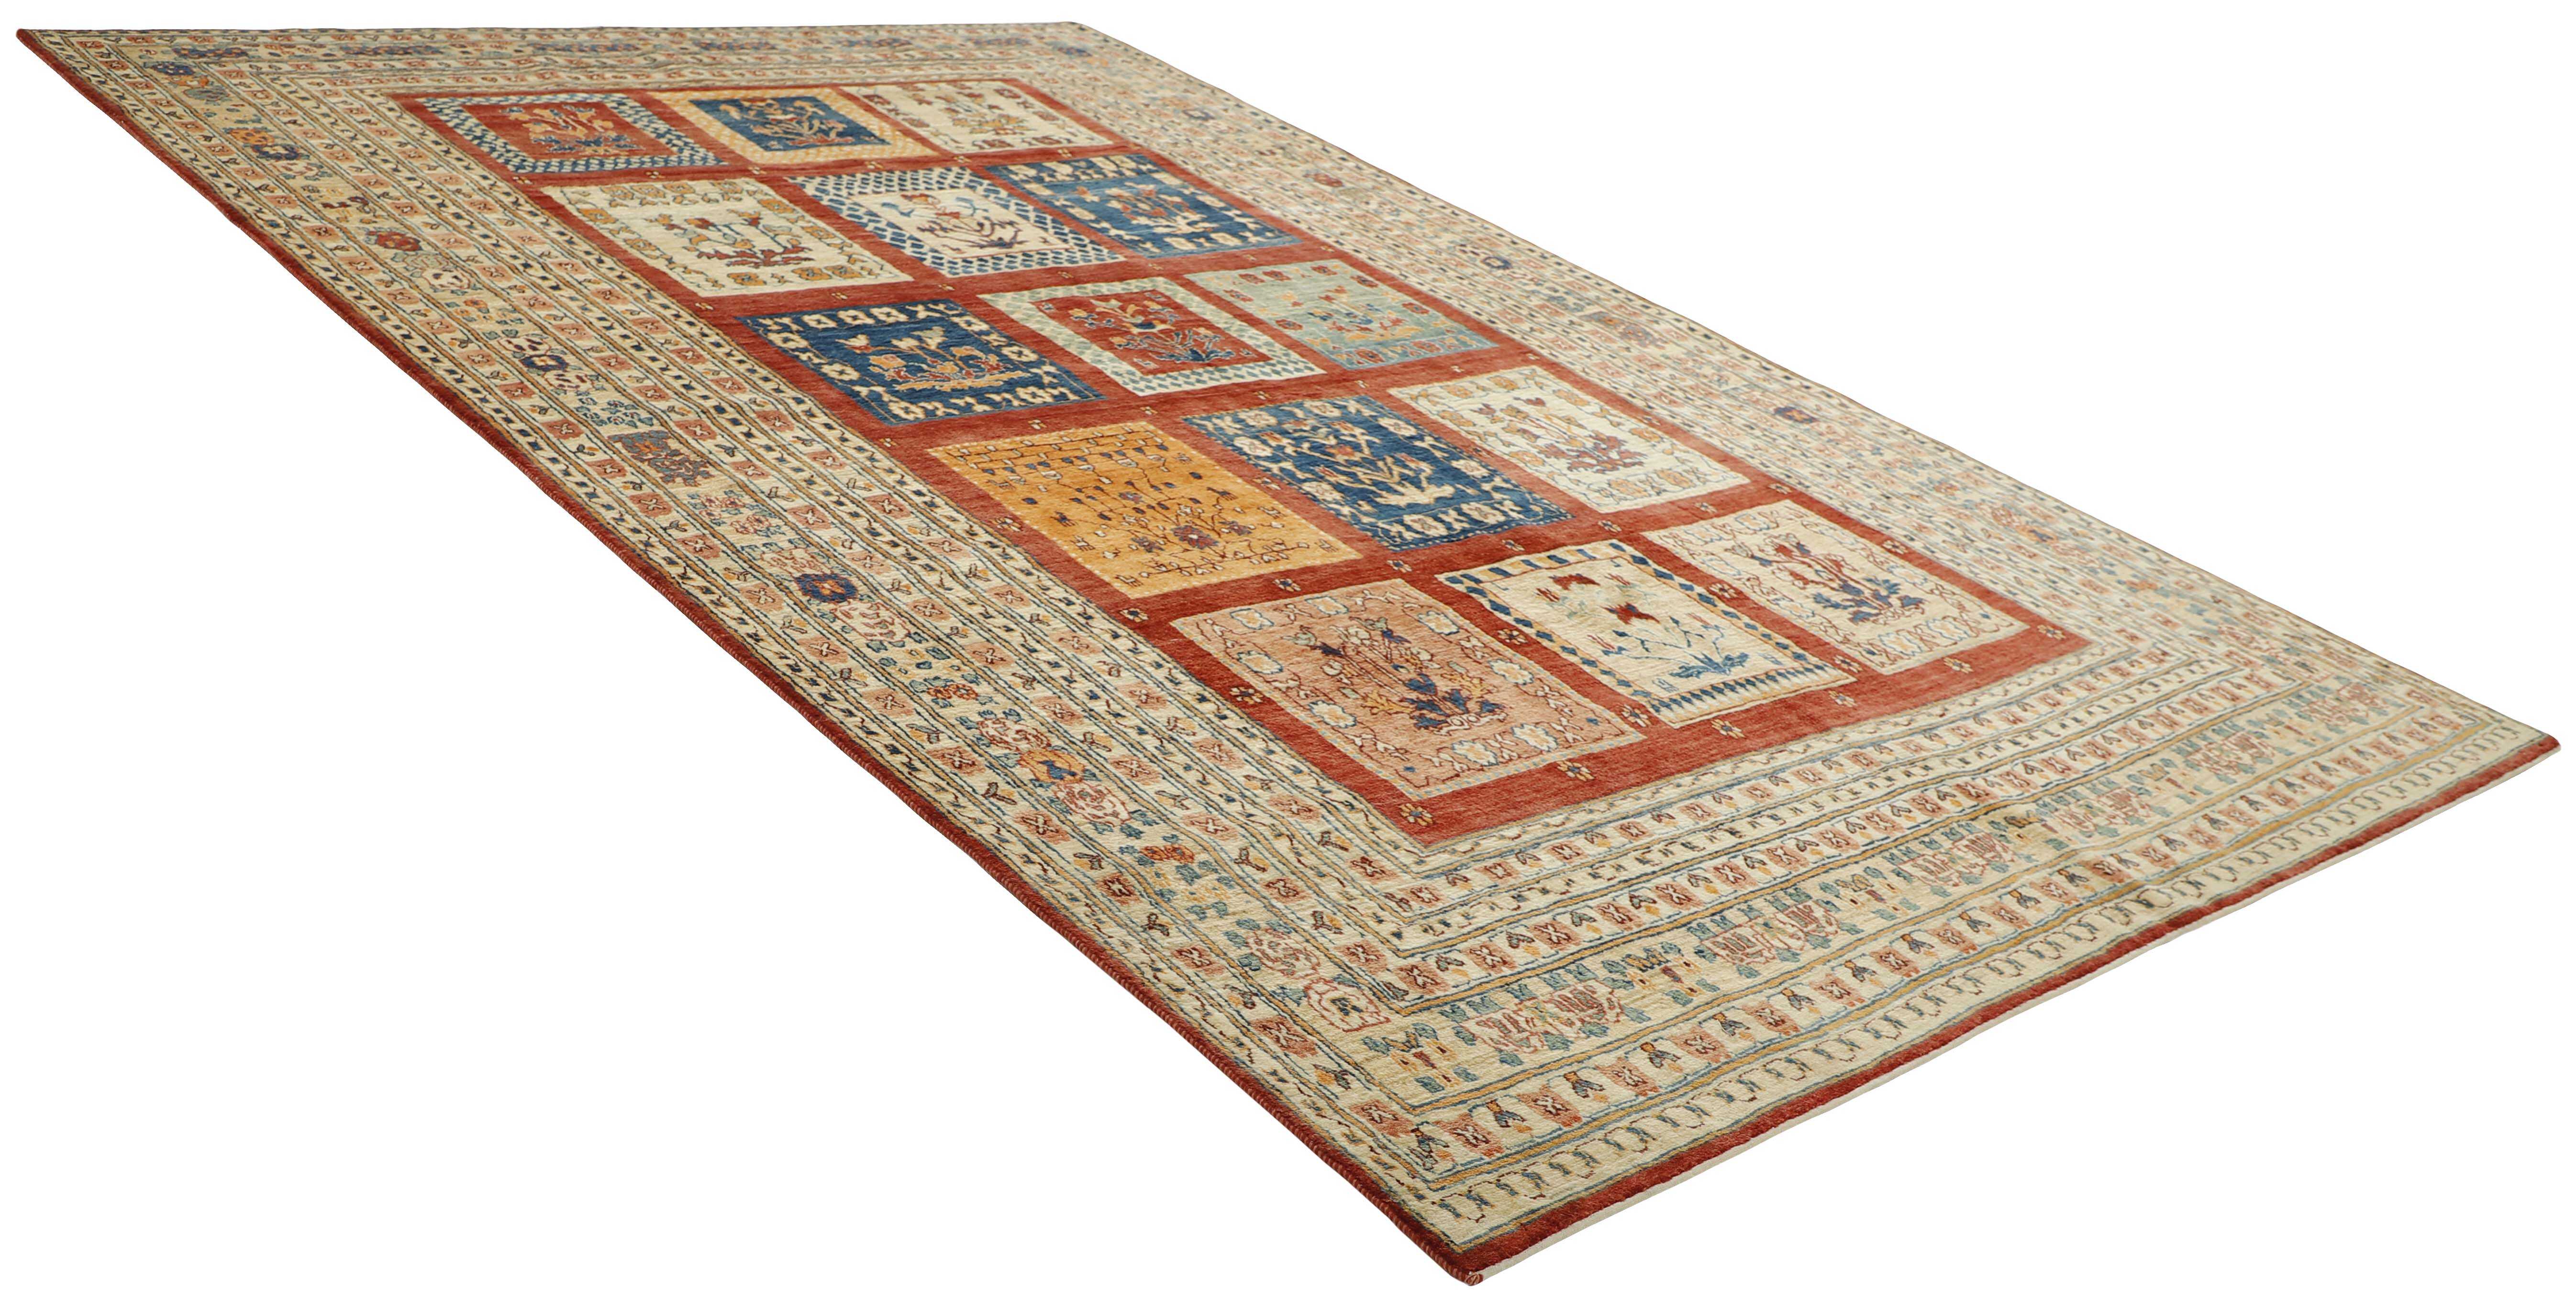 Authentic persian rug with a traditional tribal design in multicolour